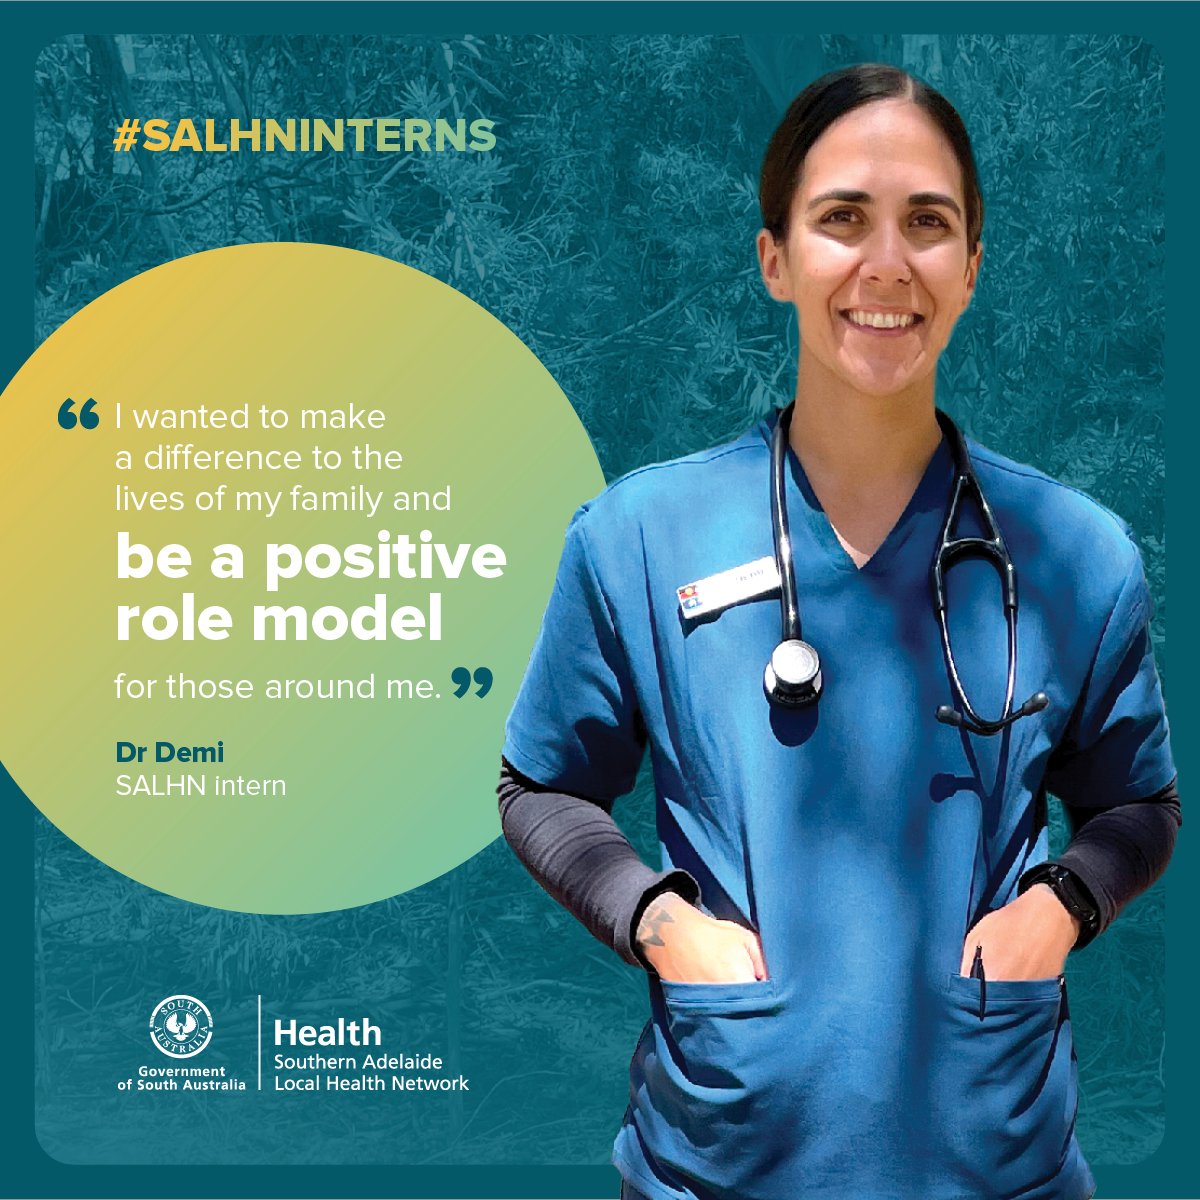 Demi is an interstate graduate who has joined SALHN as a medical intern this year. “I'm looking forward to experiencing different medical specialties and figuring out which area of medicine appeals to me most,” Demi said.